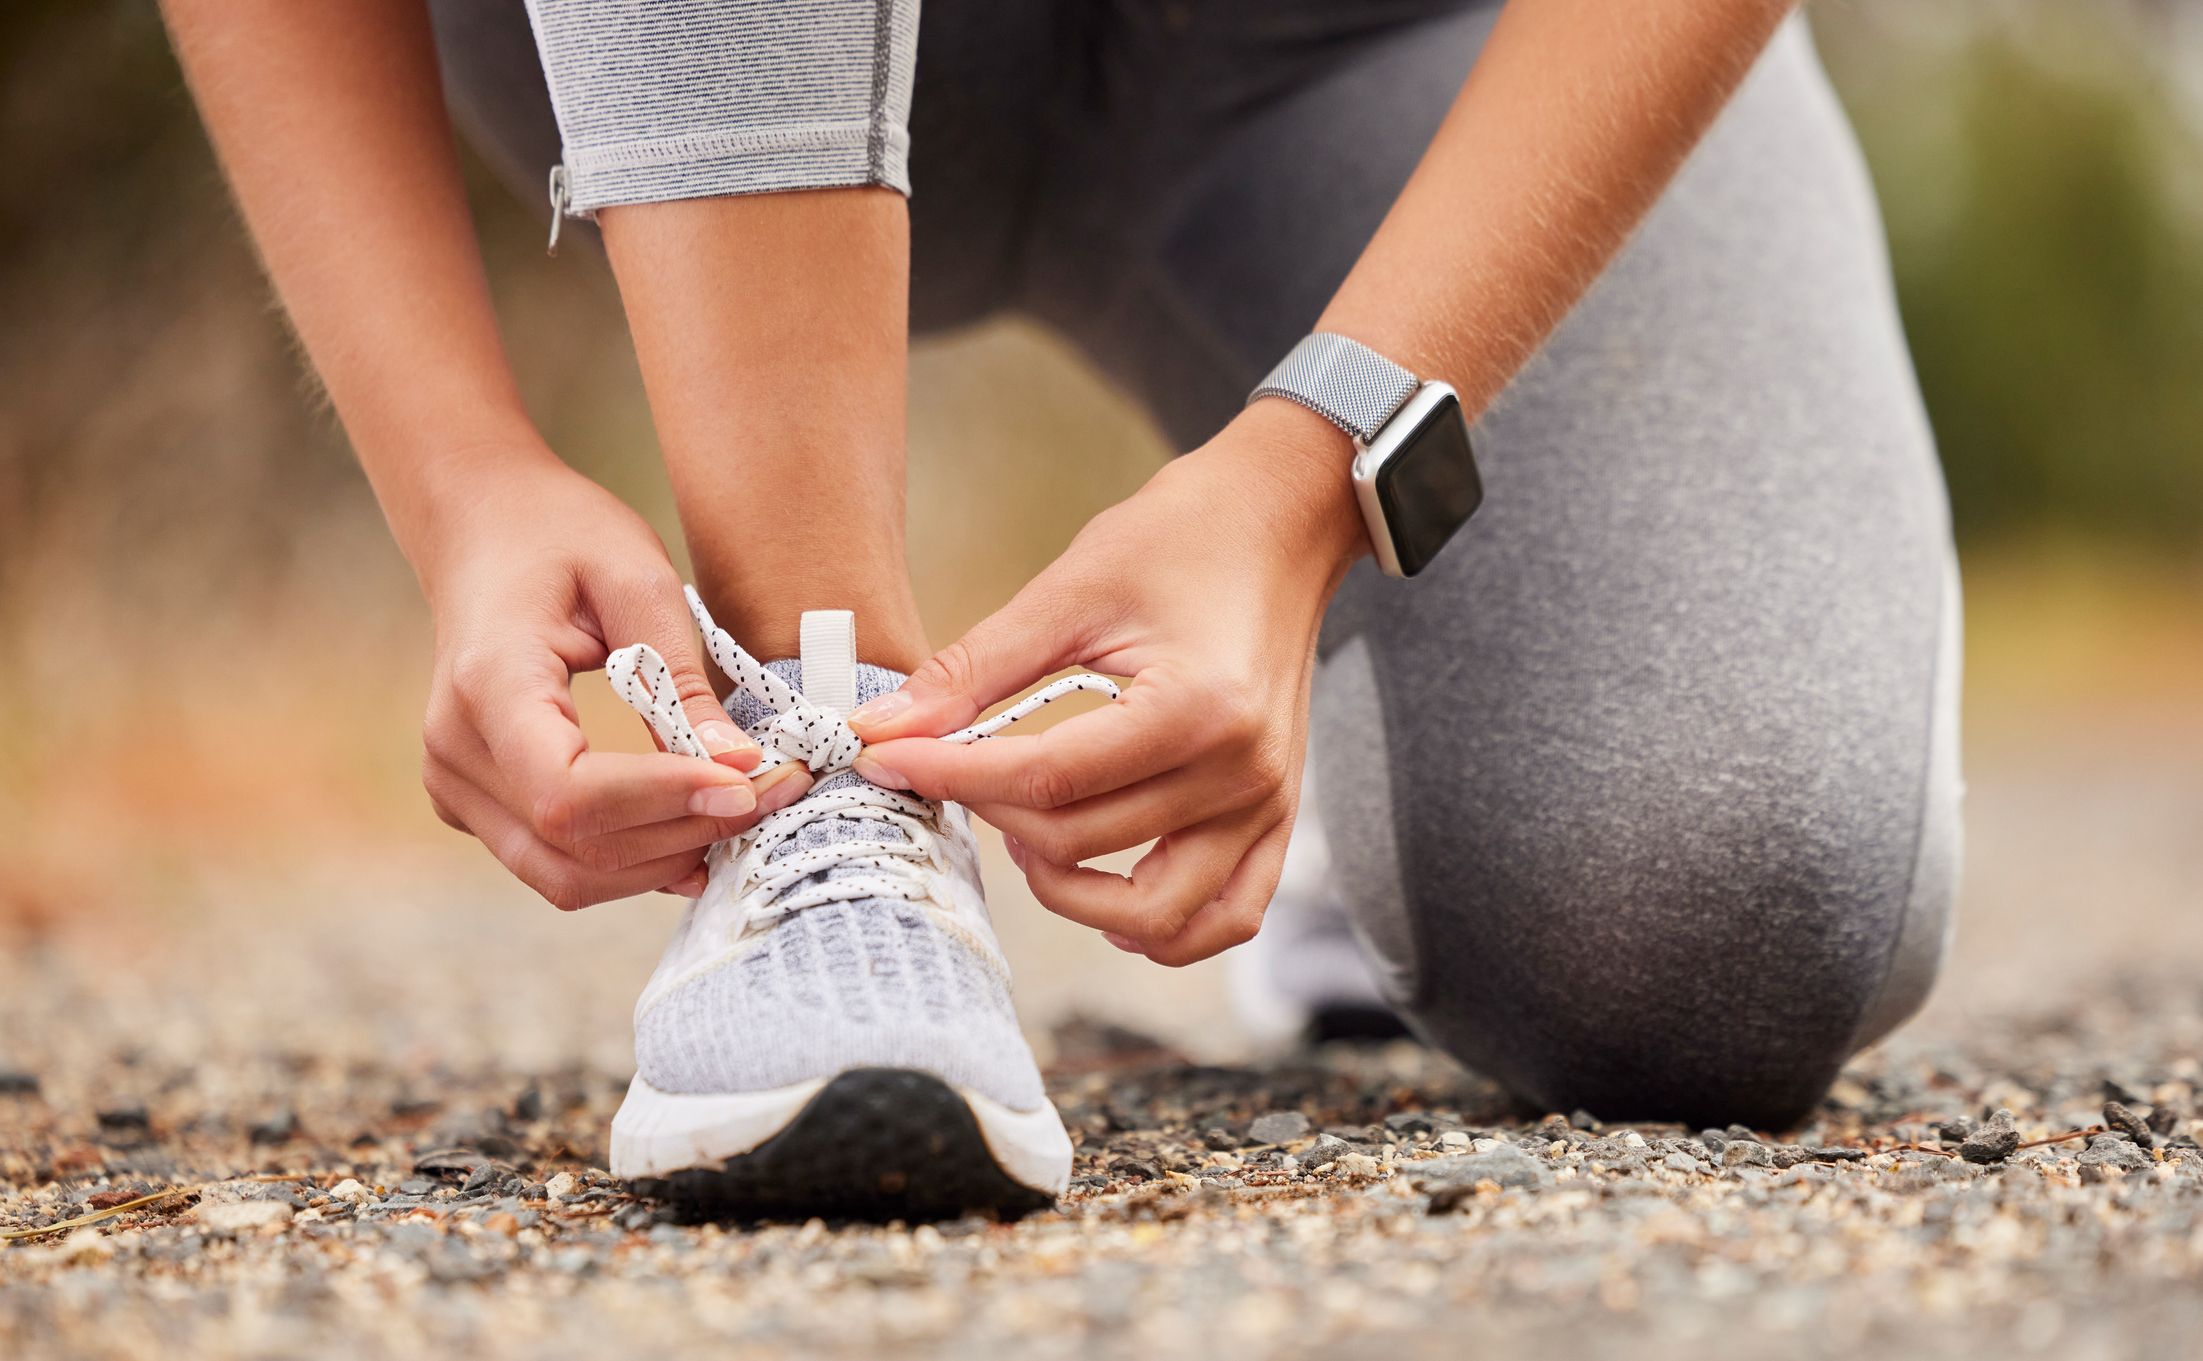 Shoes, fitness and exercise with a sports woman tying her laces before training, running or a workout. Hands, health and cardio with a female runner or athlete getting ready for an endurance run